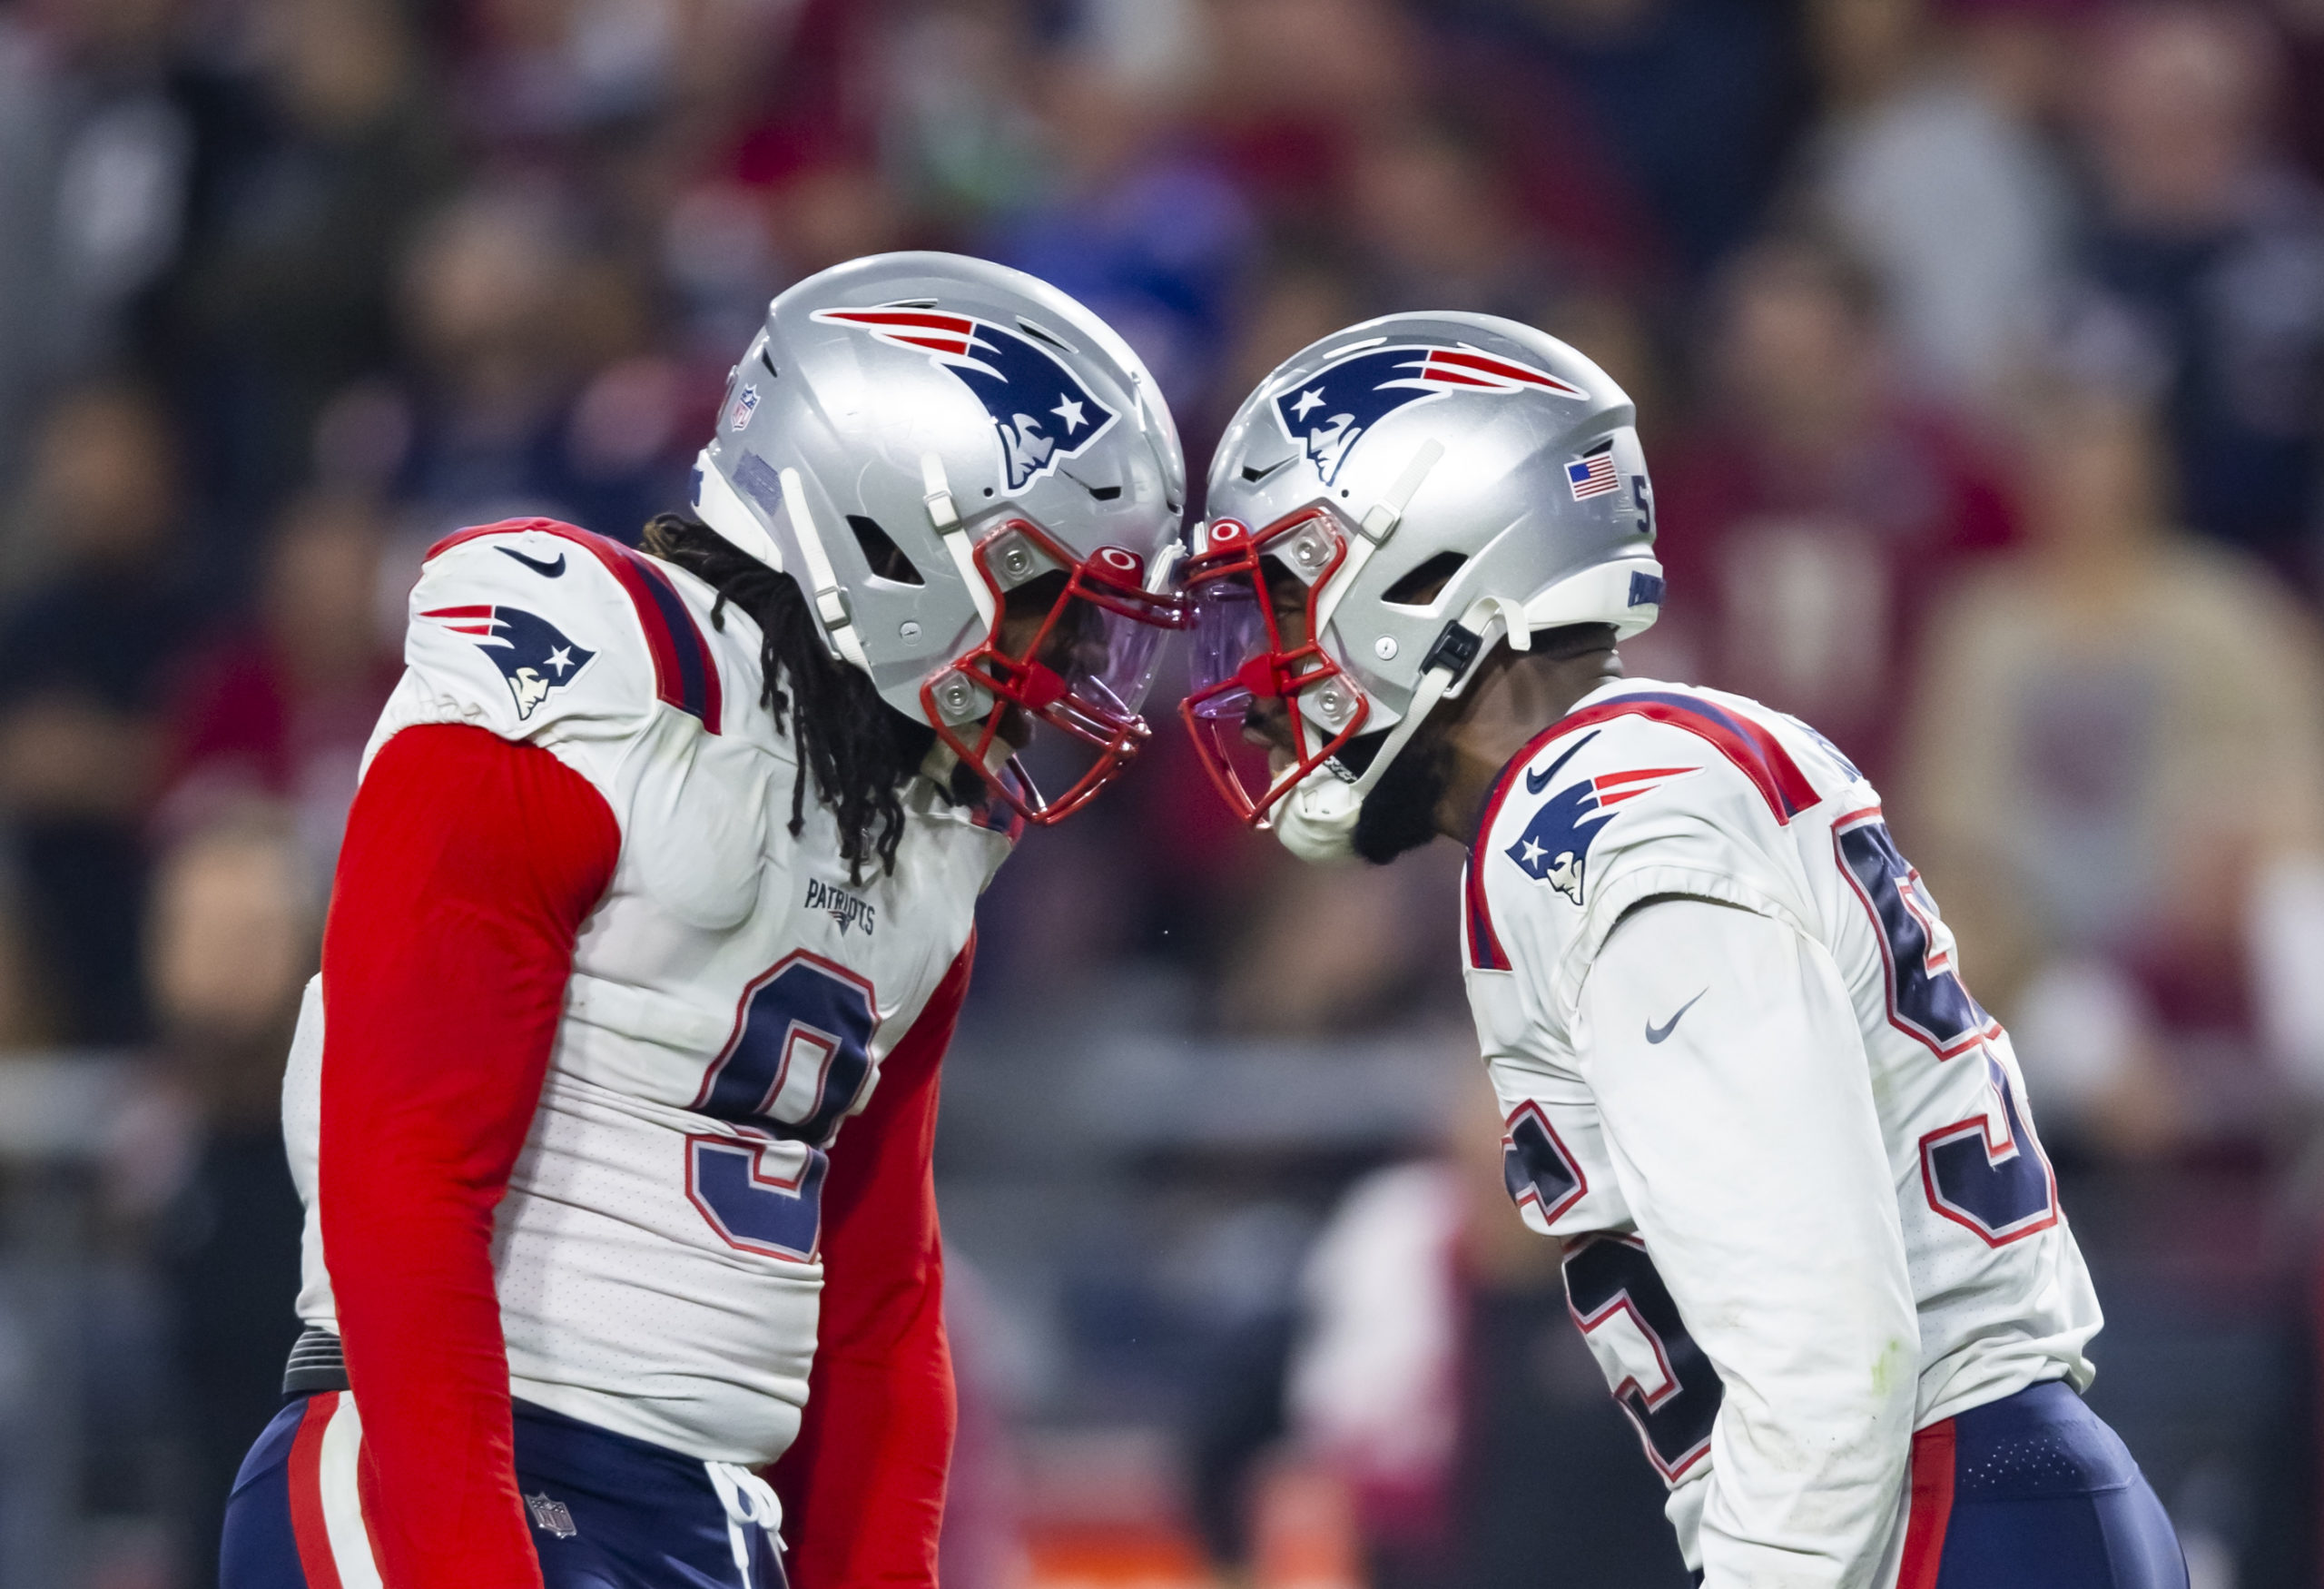 NFL Week 15 Betting: Odds, Spreads, Picks, Predictions for Patriots vs. Raiders